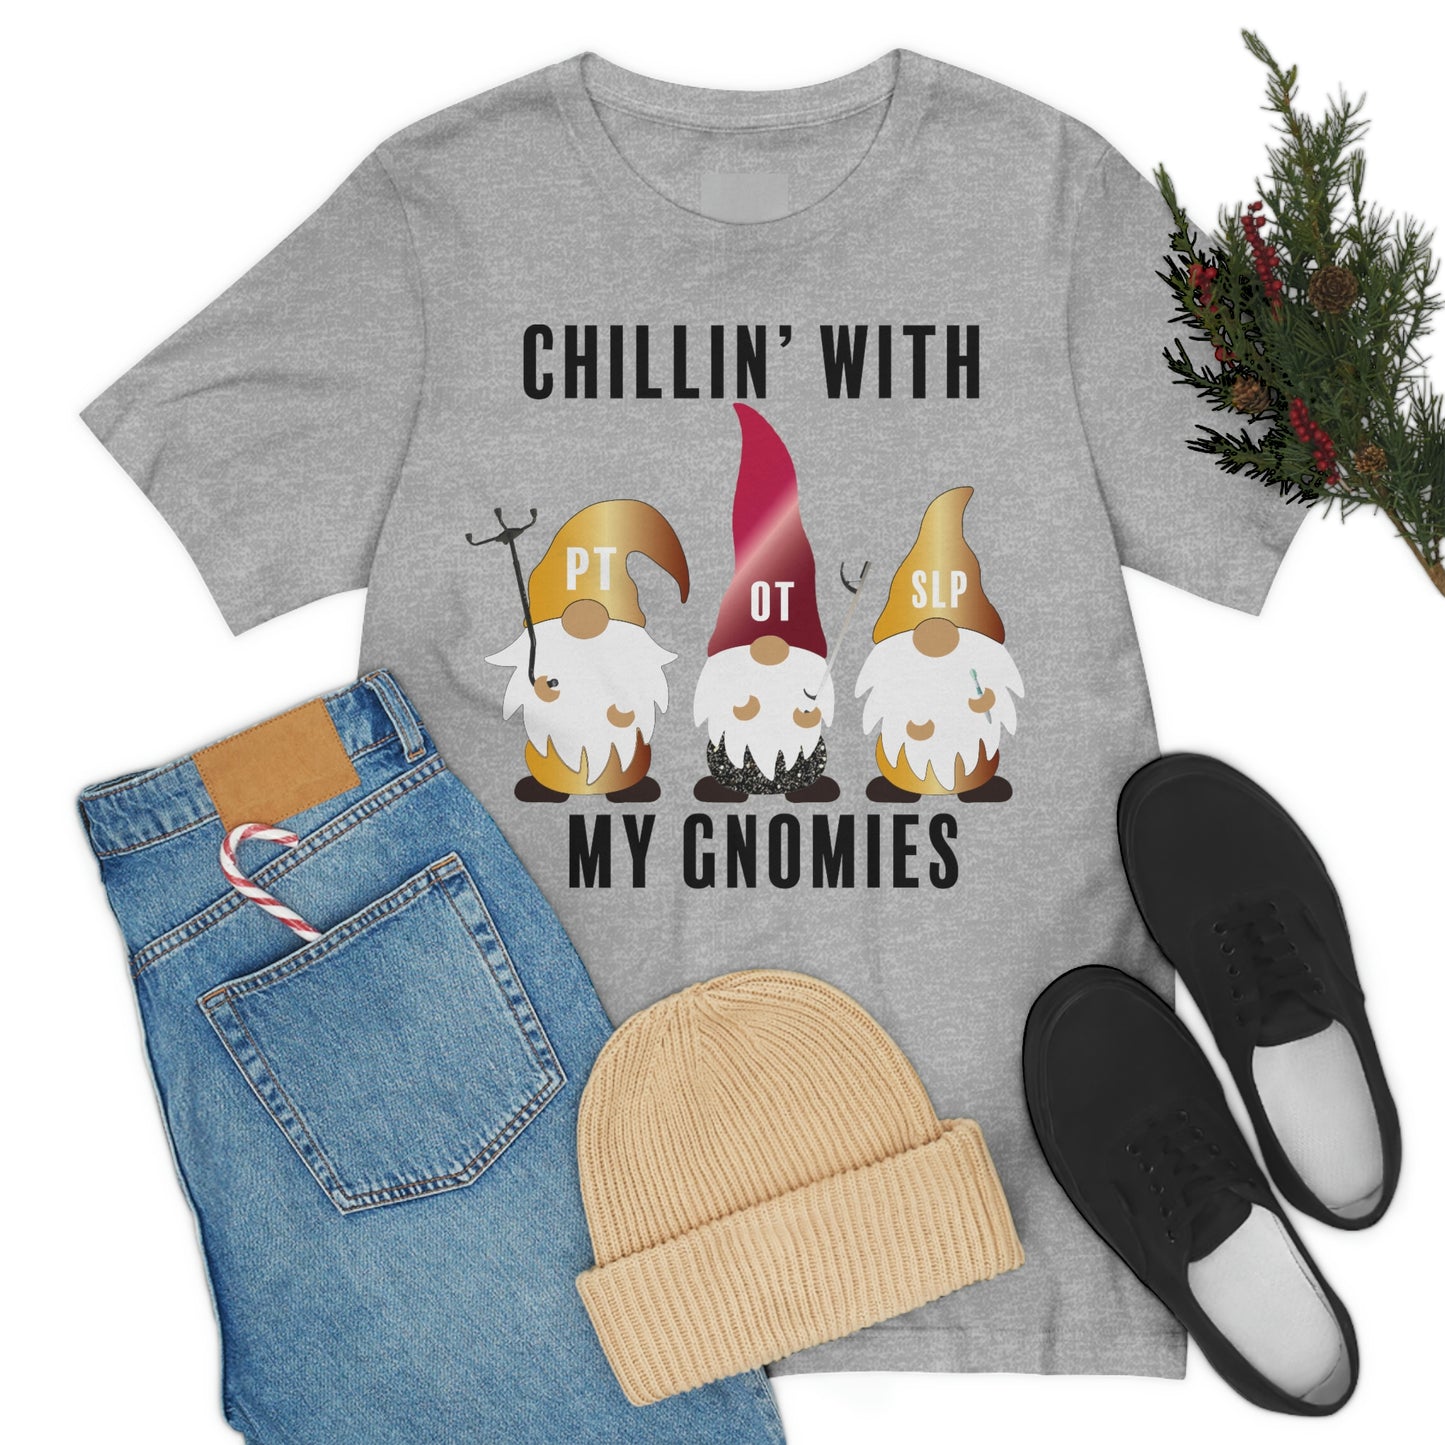 Chillin' with my gnomies, OT, PT and SLP therapy shirt